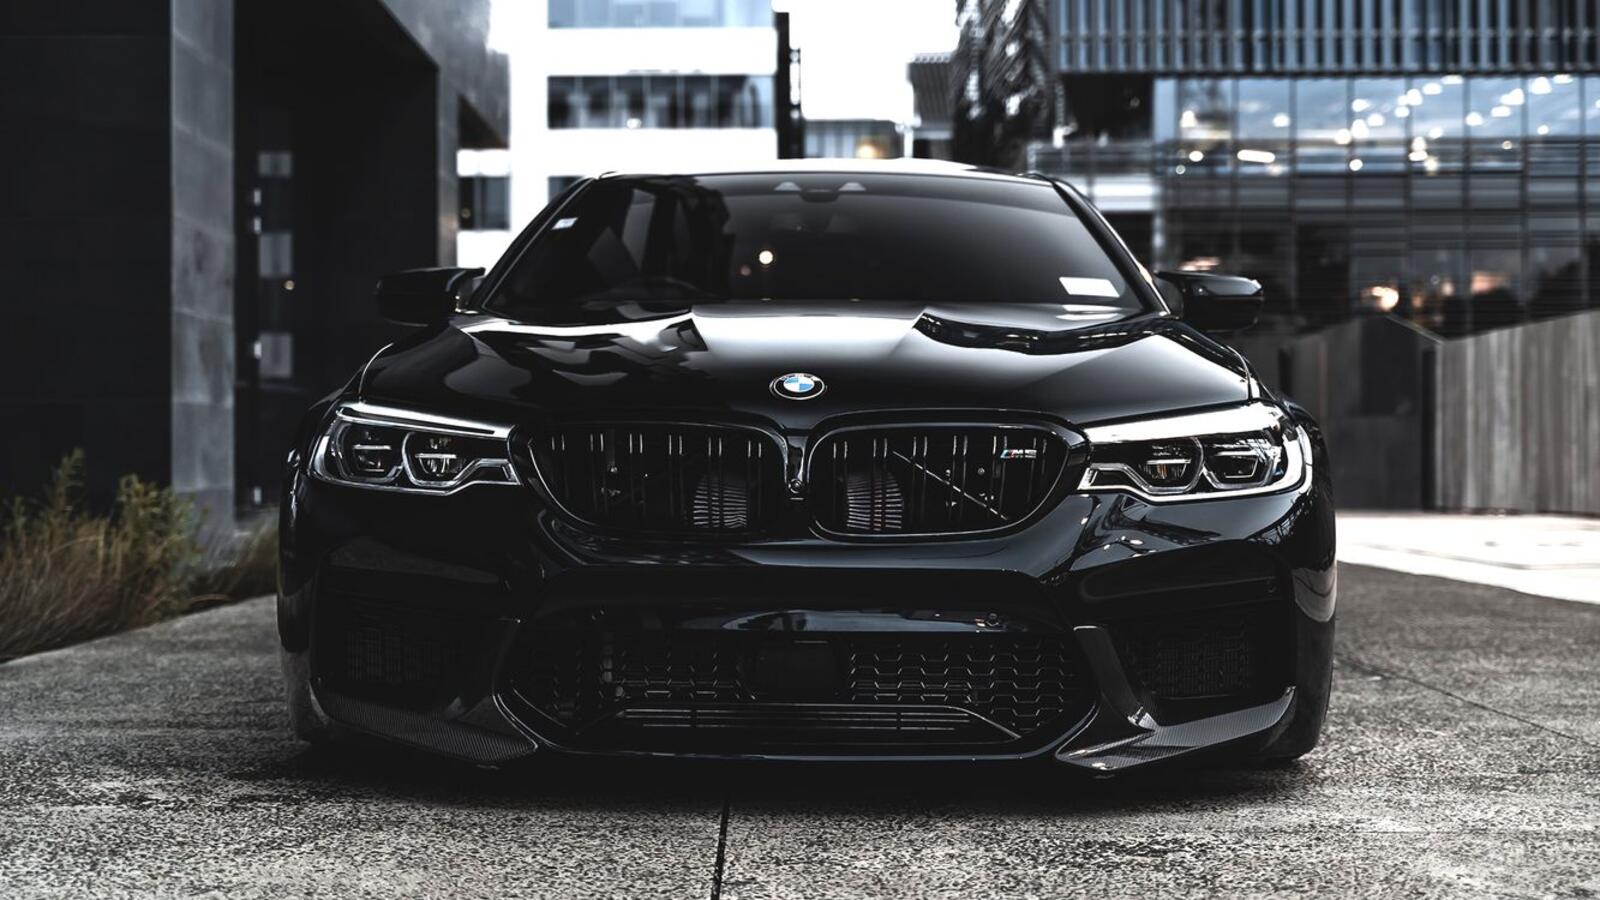 Wallpapers bmw m5 front view luxury cars on the desktop